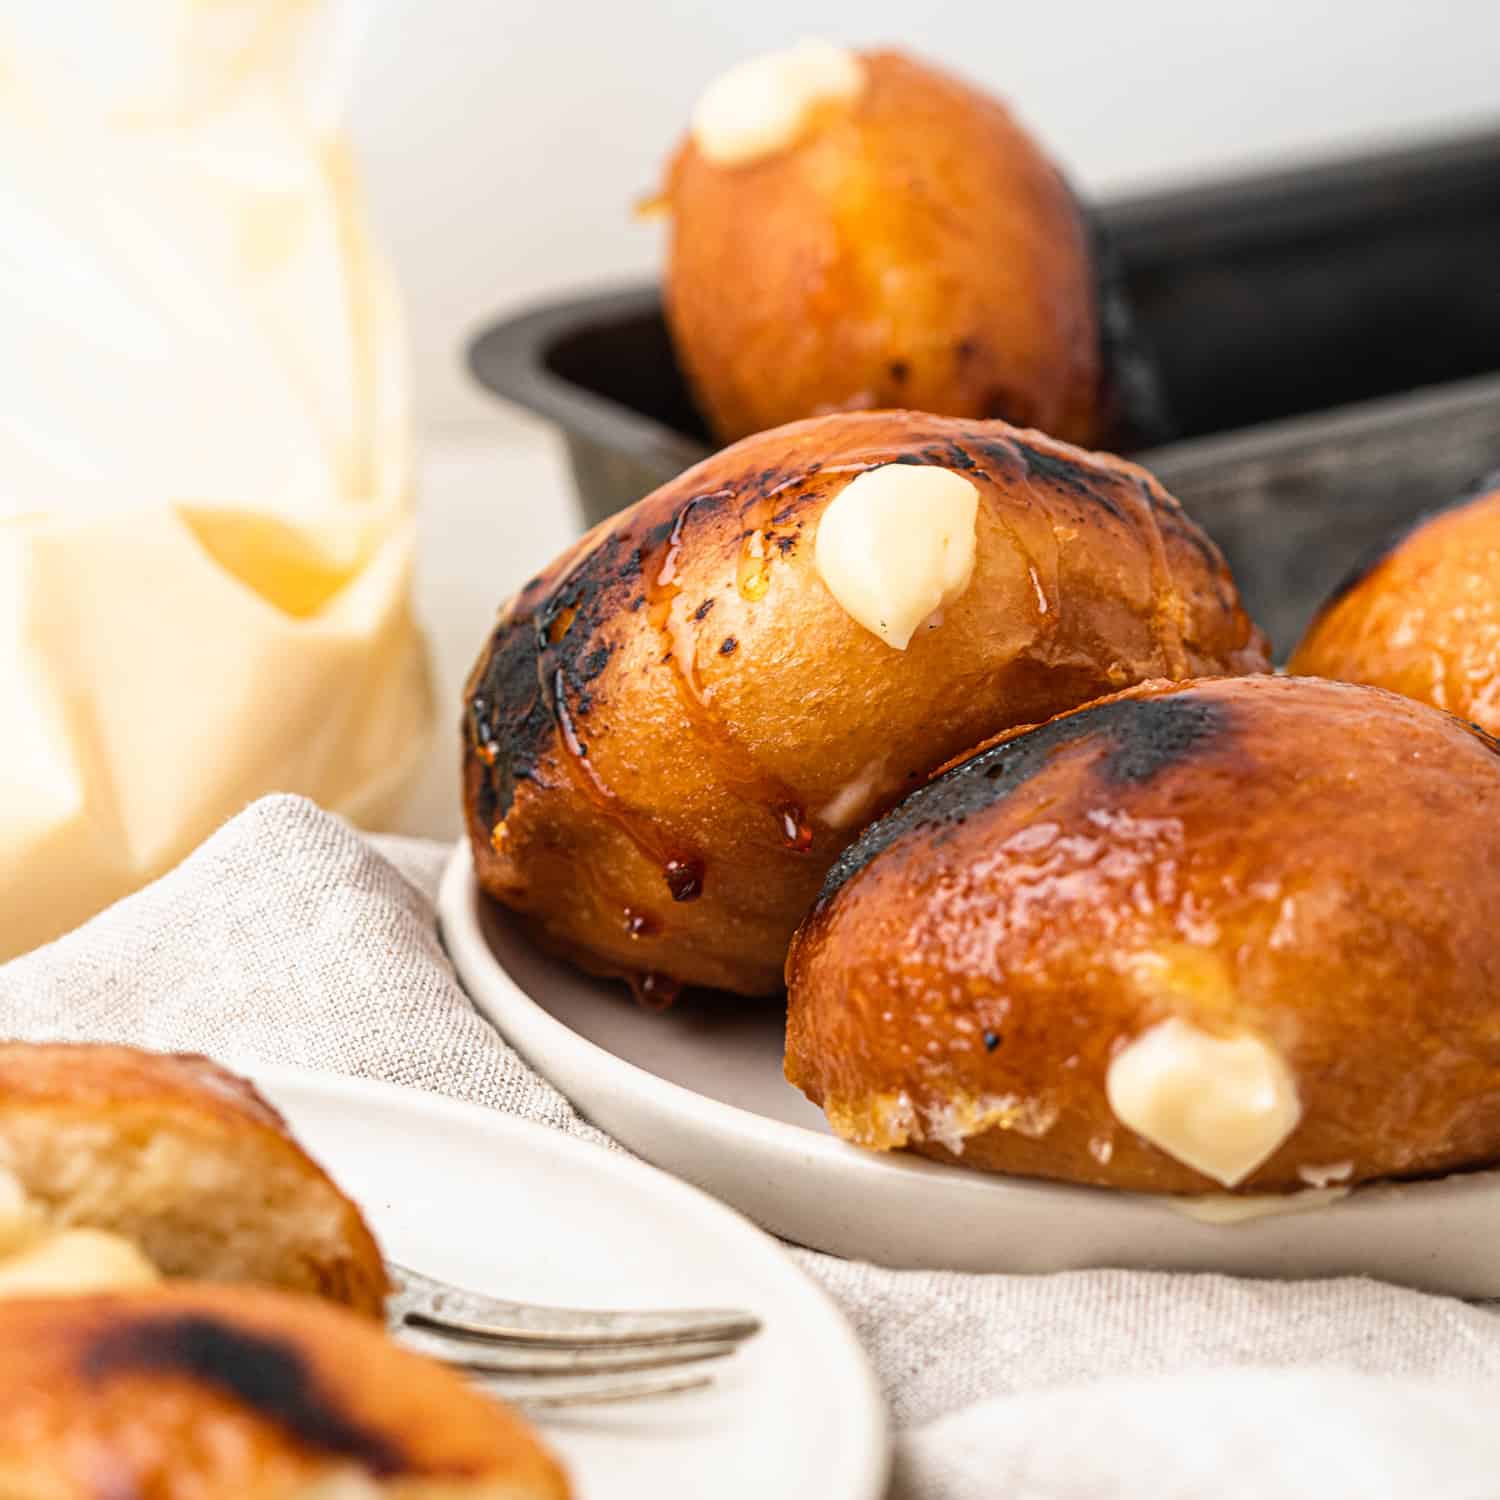 Yeast raised donuts filled with creamy vanilla custard and coated in a caramelised sugar coating